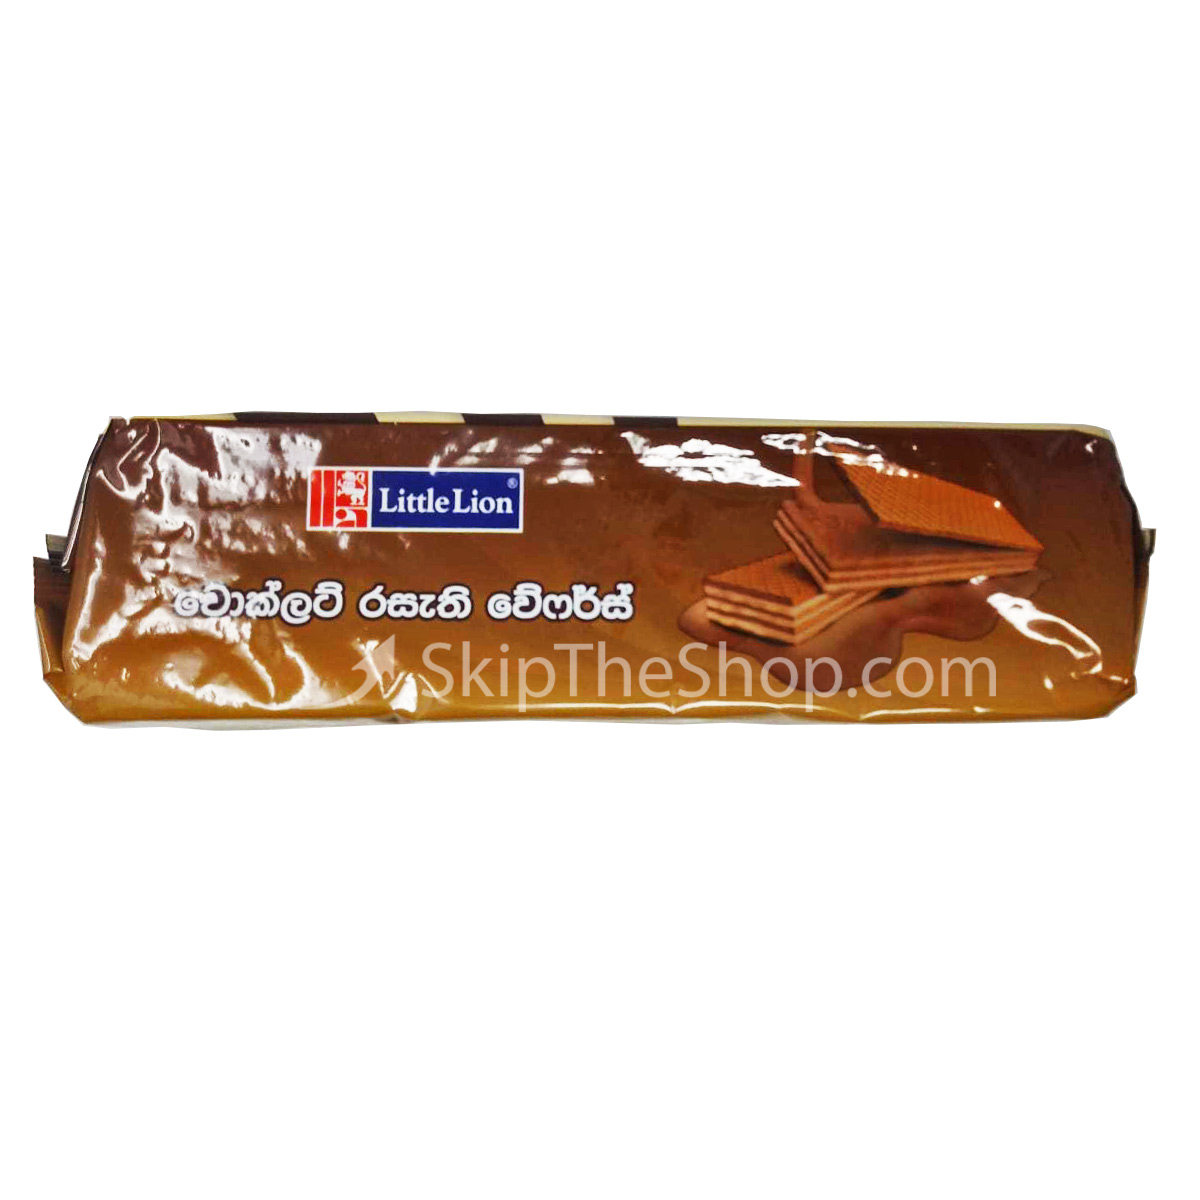 Little Lion Wafers Chocolate (Packet) 400g